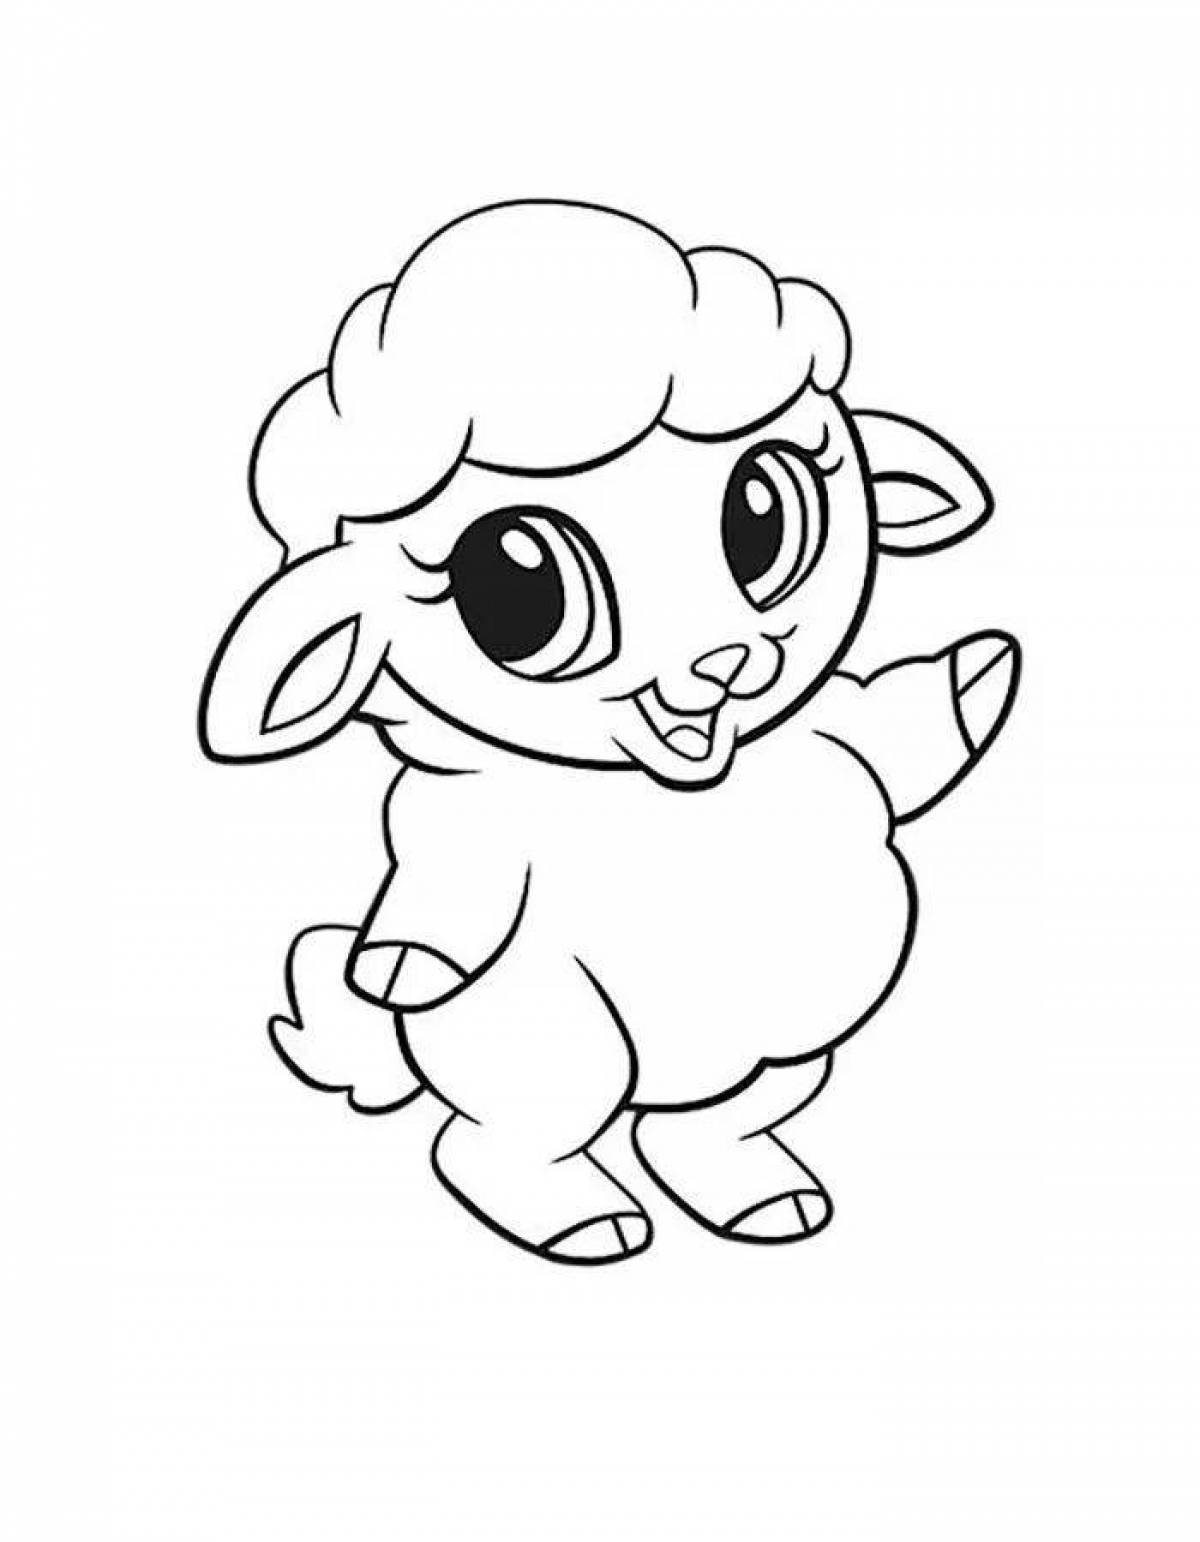 Fat animal coloring pages